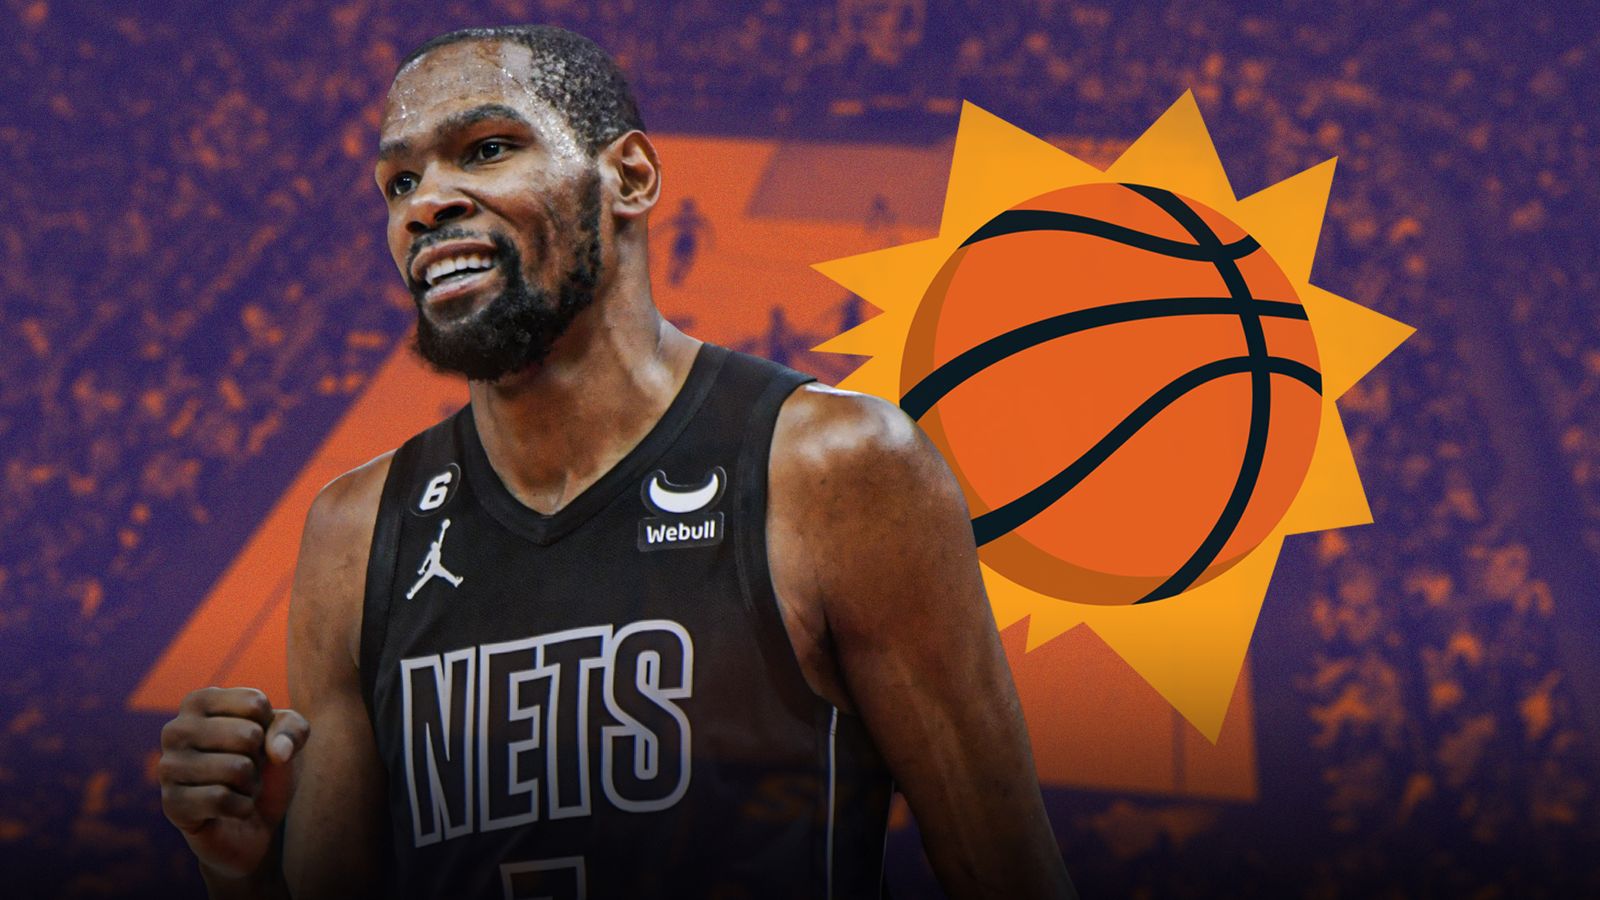 Kevin Durant Brooklyn Nets Wallpapers - Wallpaper Cave